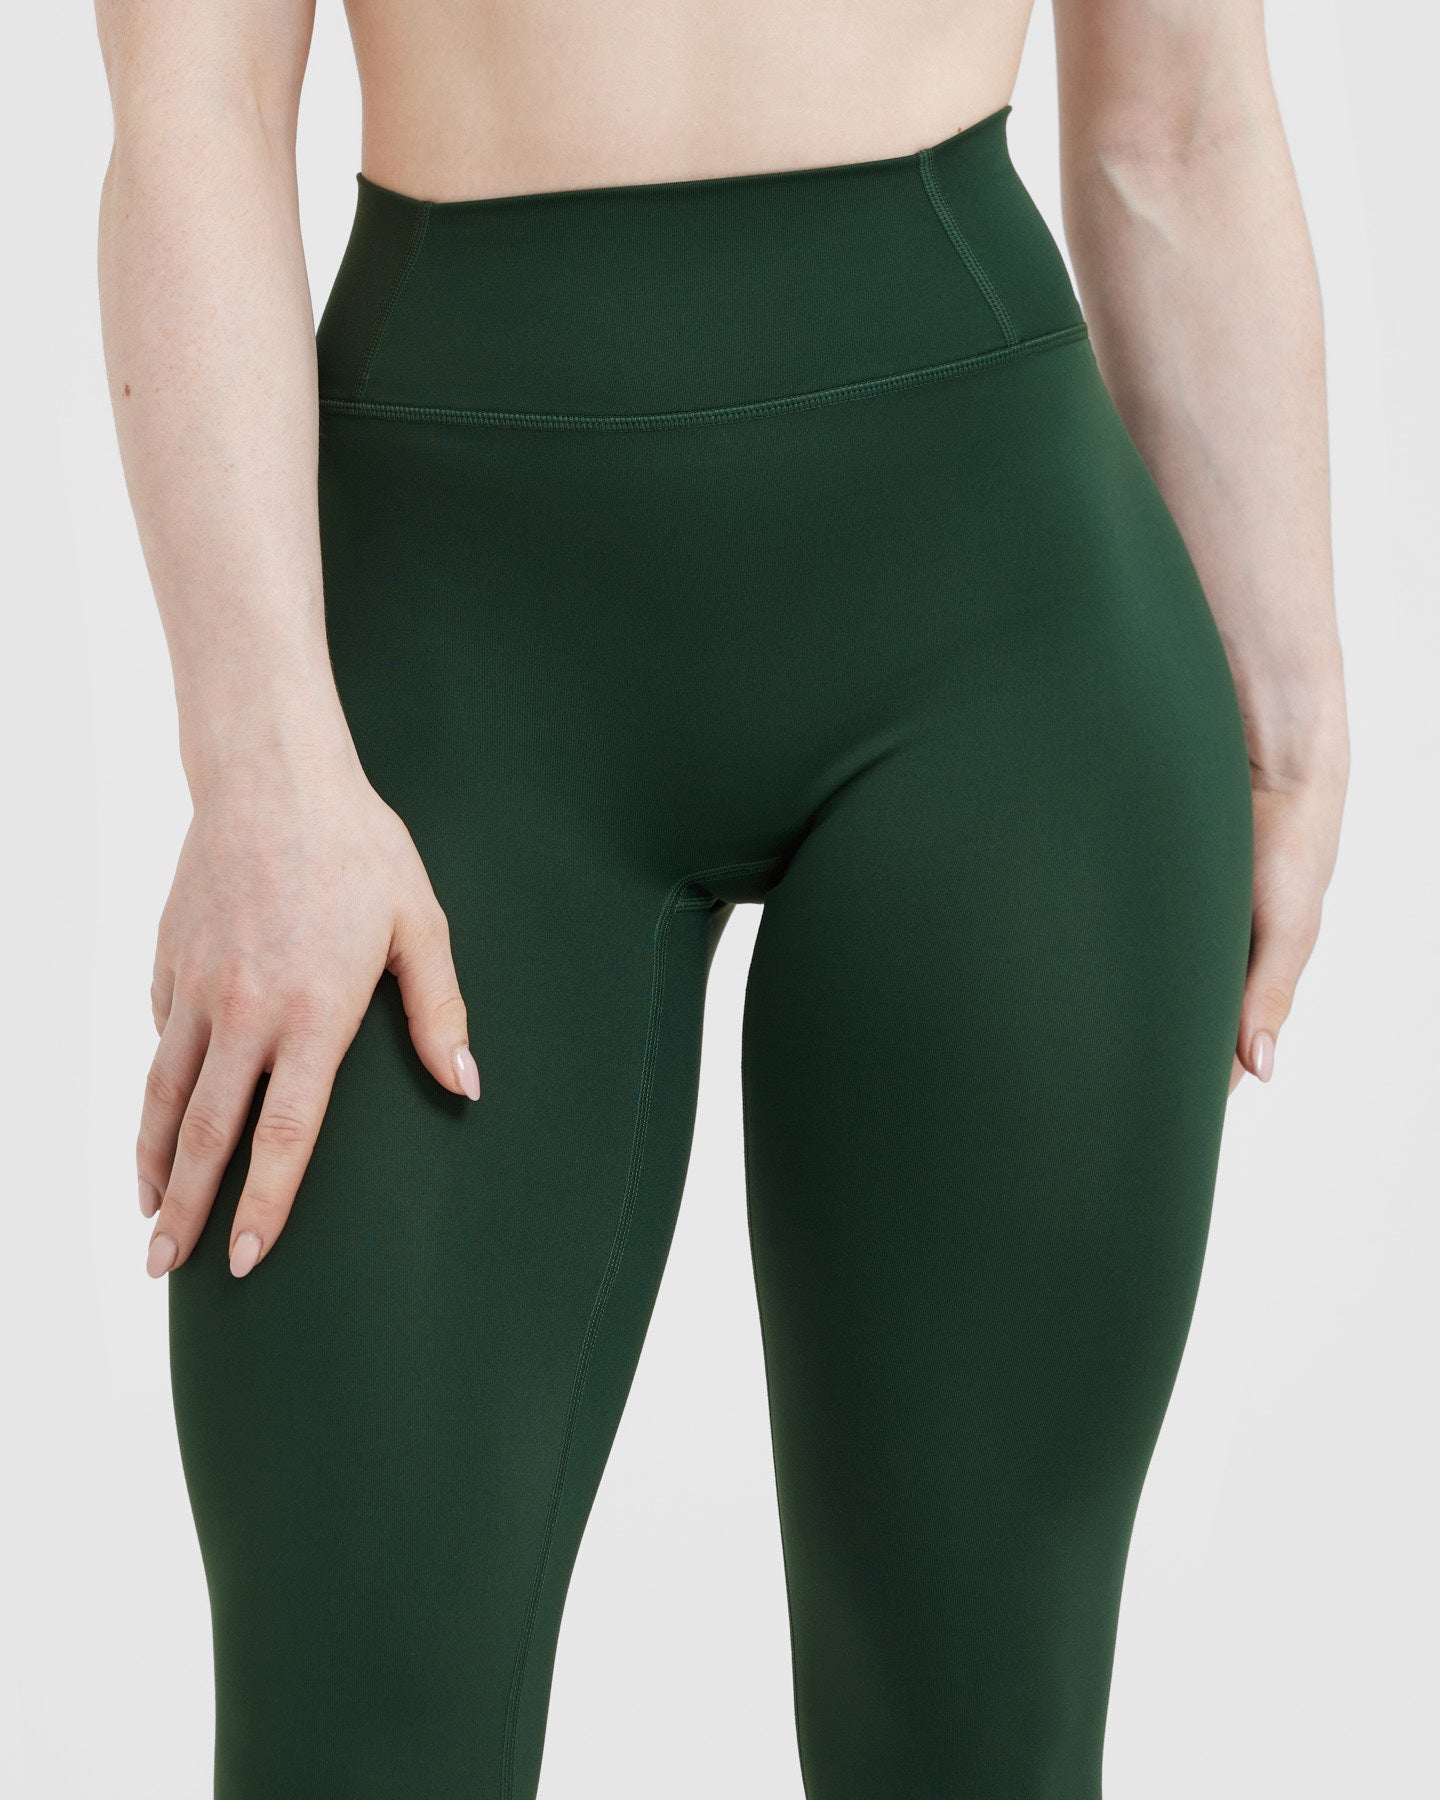 Girlfriend Collective Women's High-Rise Compressive Leggings, Moss, Green,  XS at  Women's Clothing store